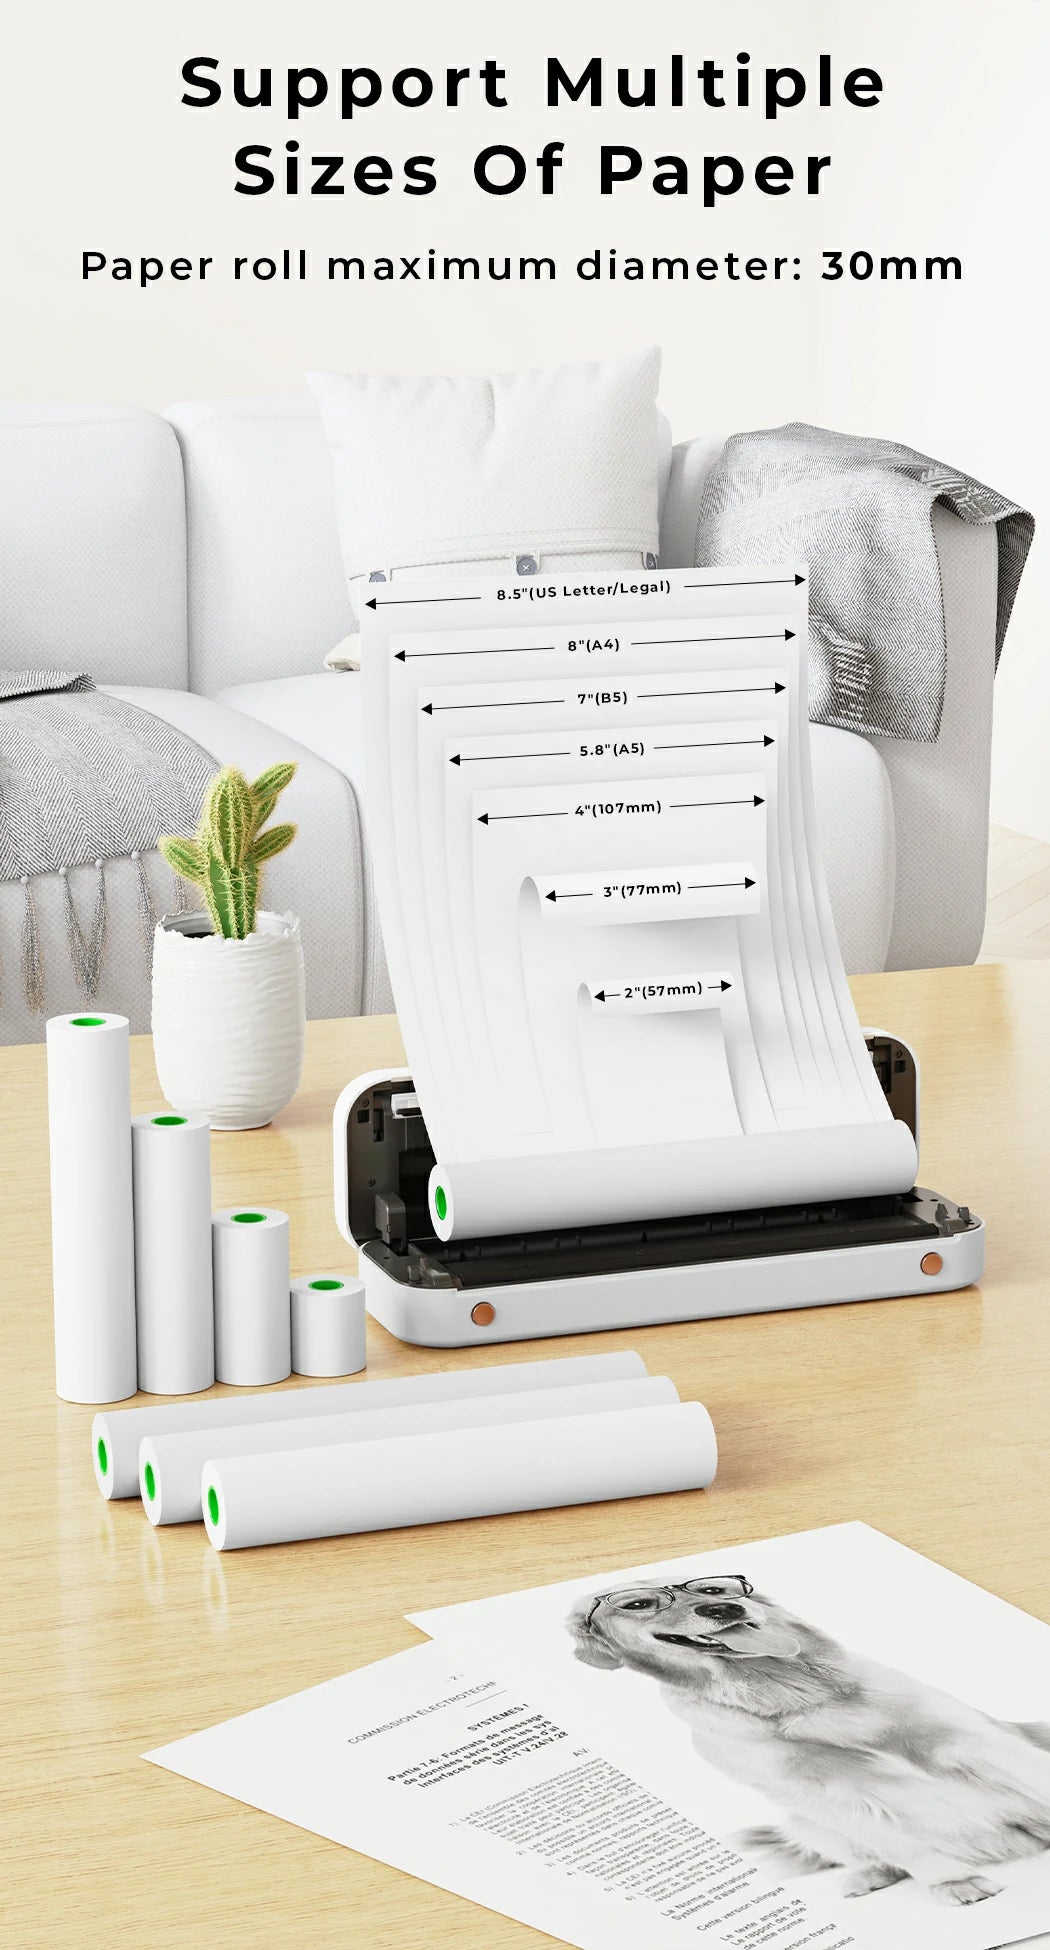 MUNBYN A4 thermal printer supports multiple sizes of paper.